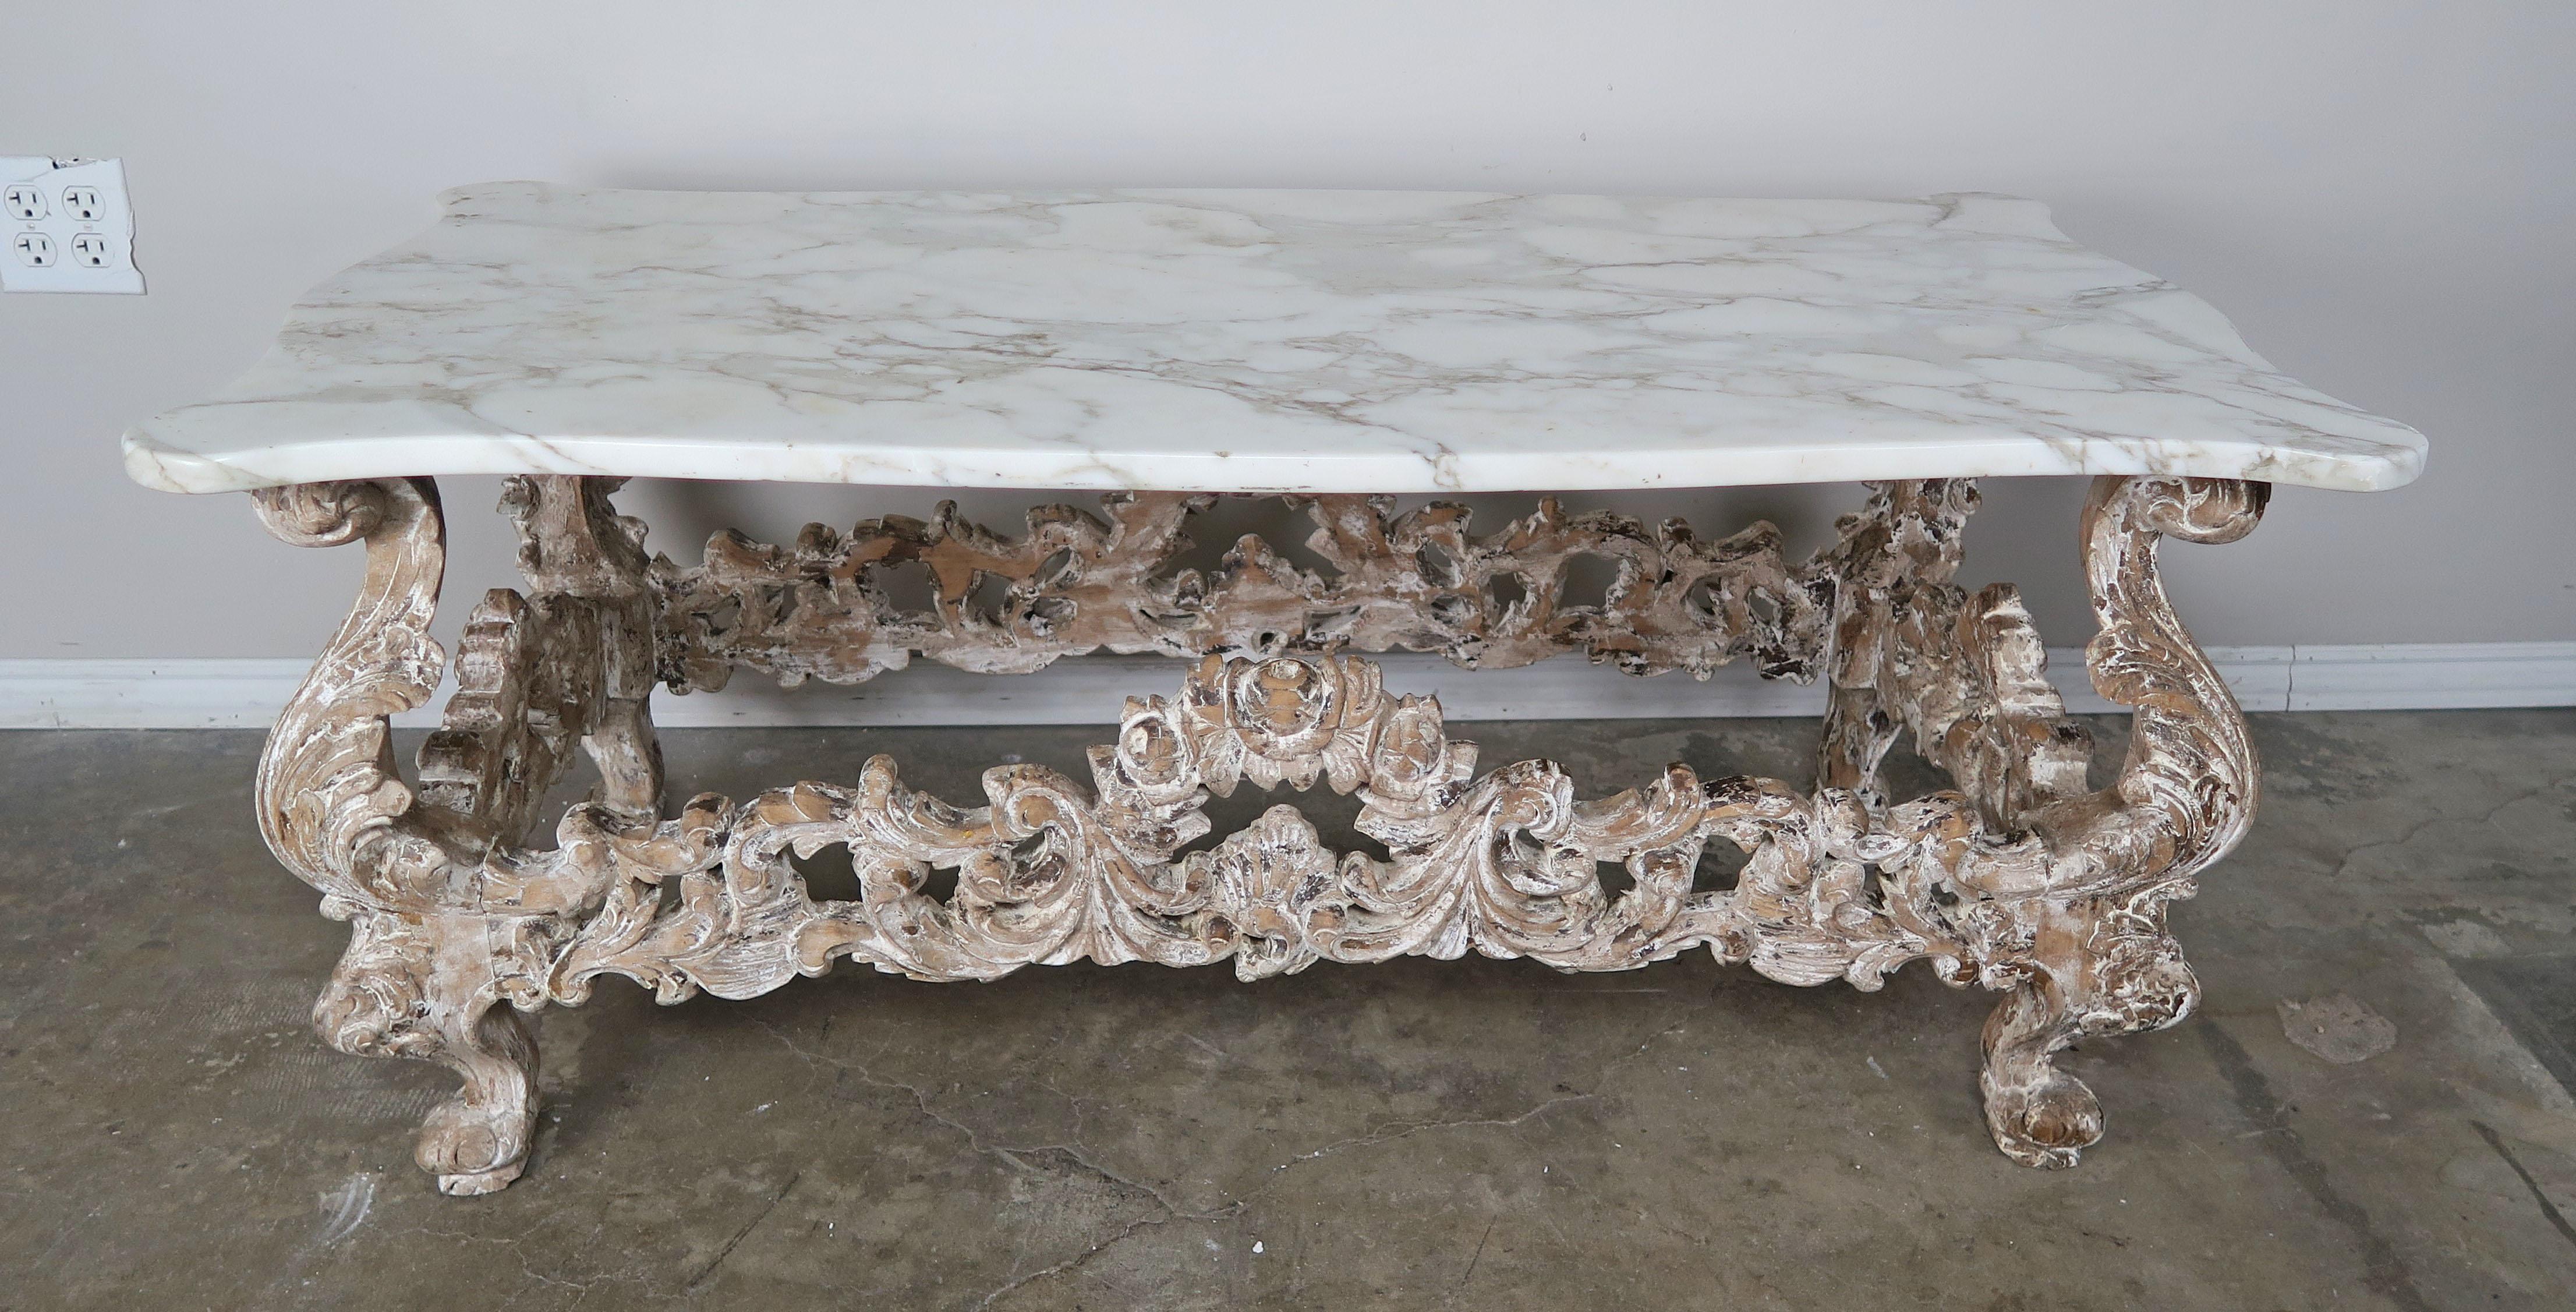 French Rococo style heavily carved and painted coffee table depicting swirling acanthus leaves throughout. The table stand on four cabriole legs with rams head feet. A beautiful serpentine shaped Carrara marble top sits on this exquisite base. Worn